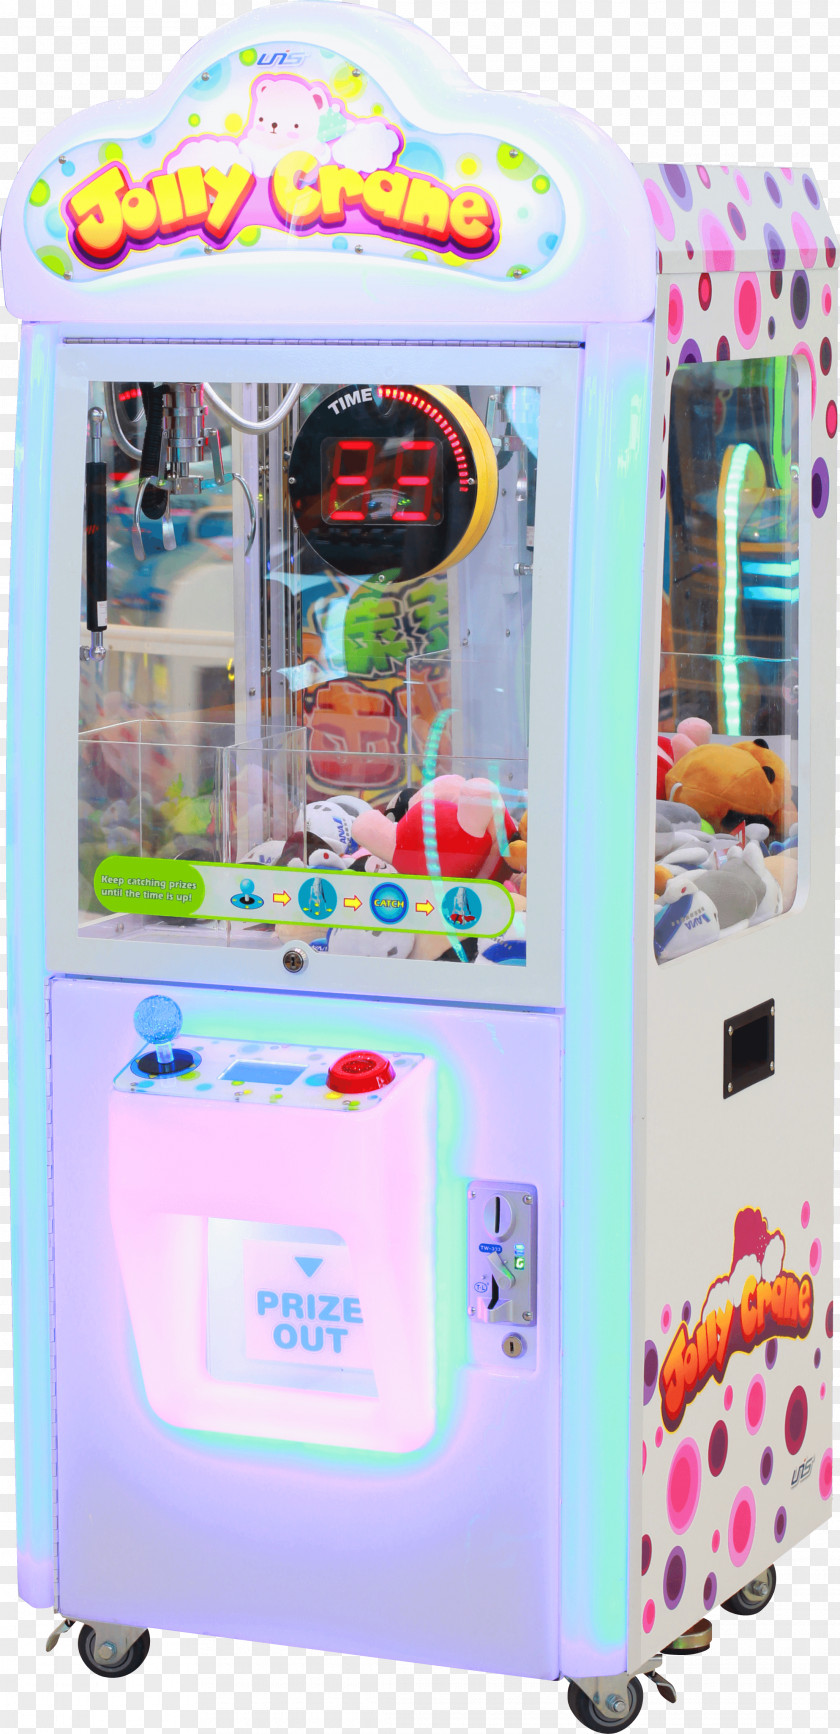 Toy Claw Crane Game Machine PNG